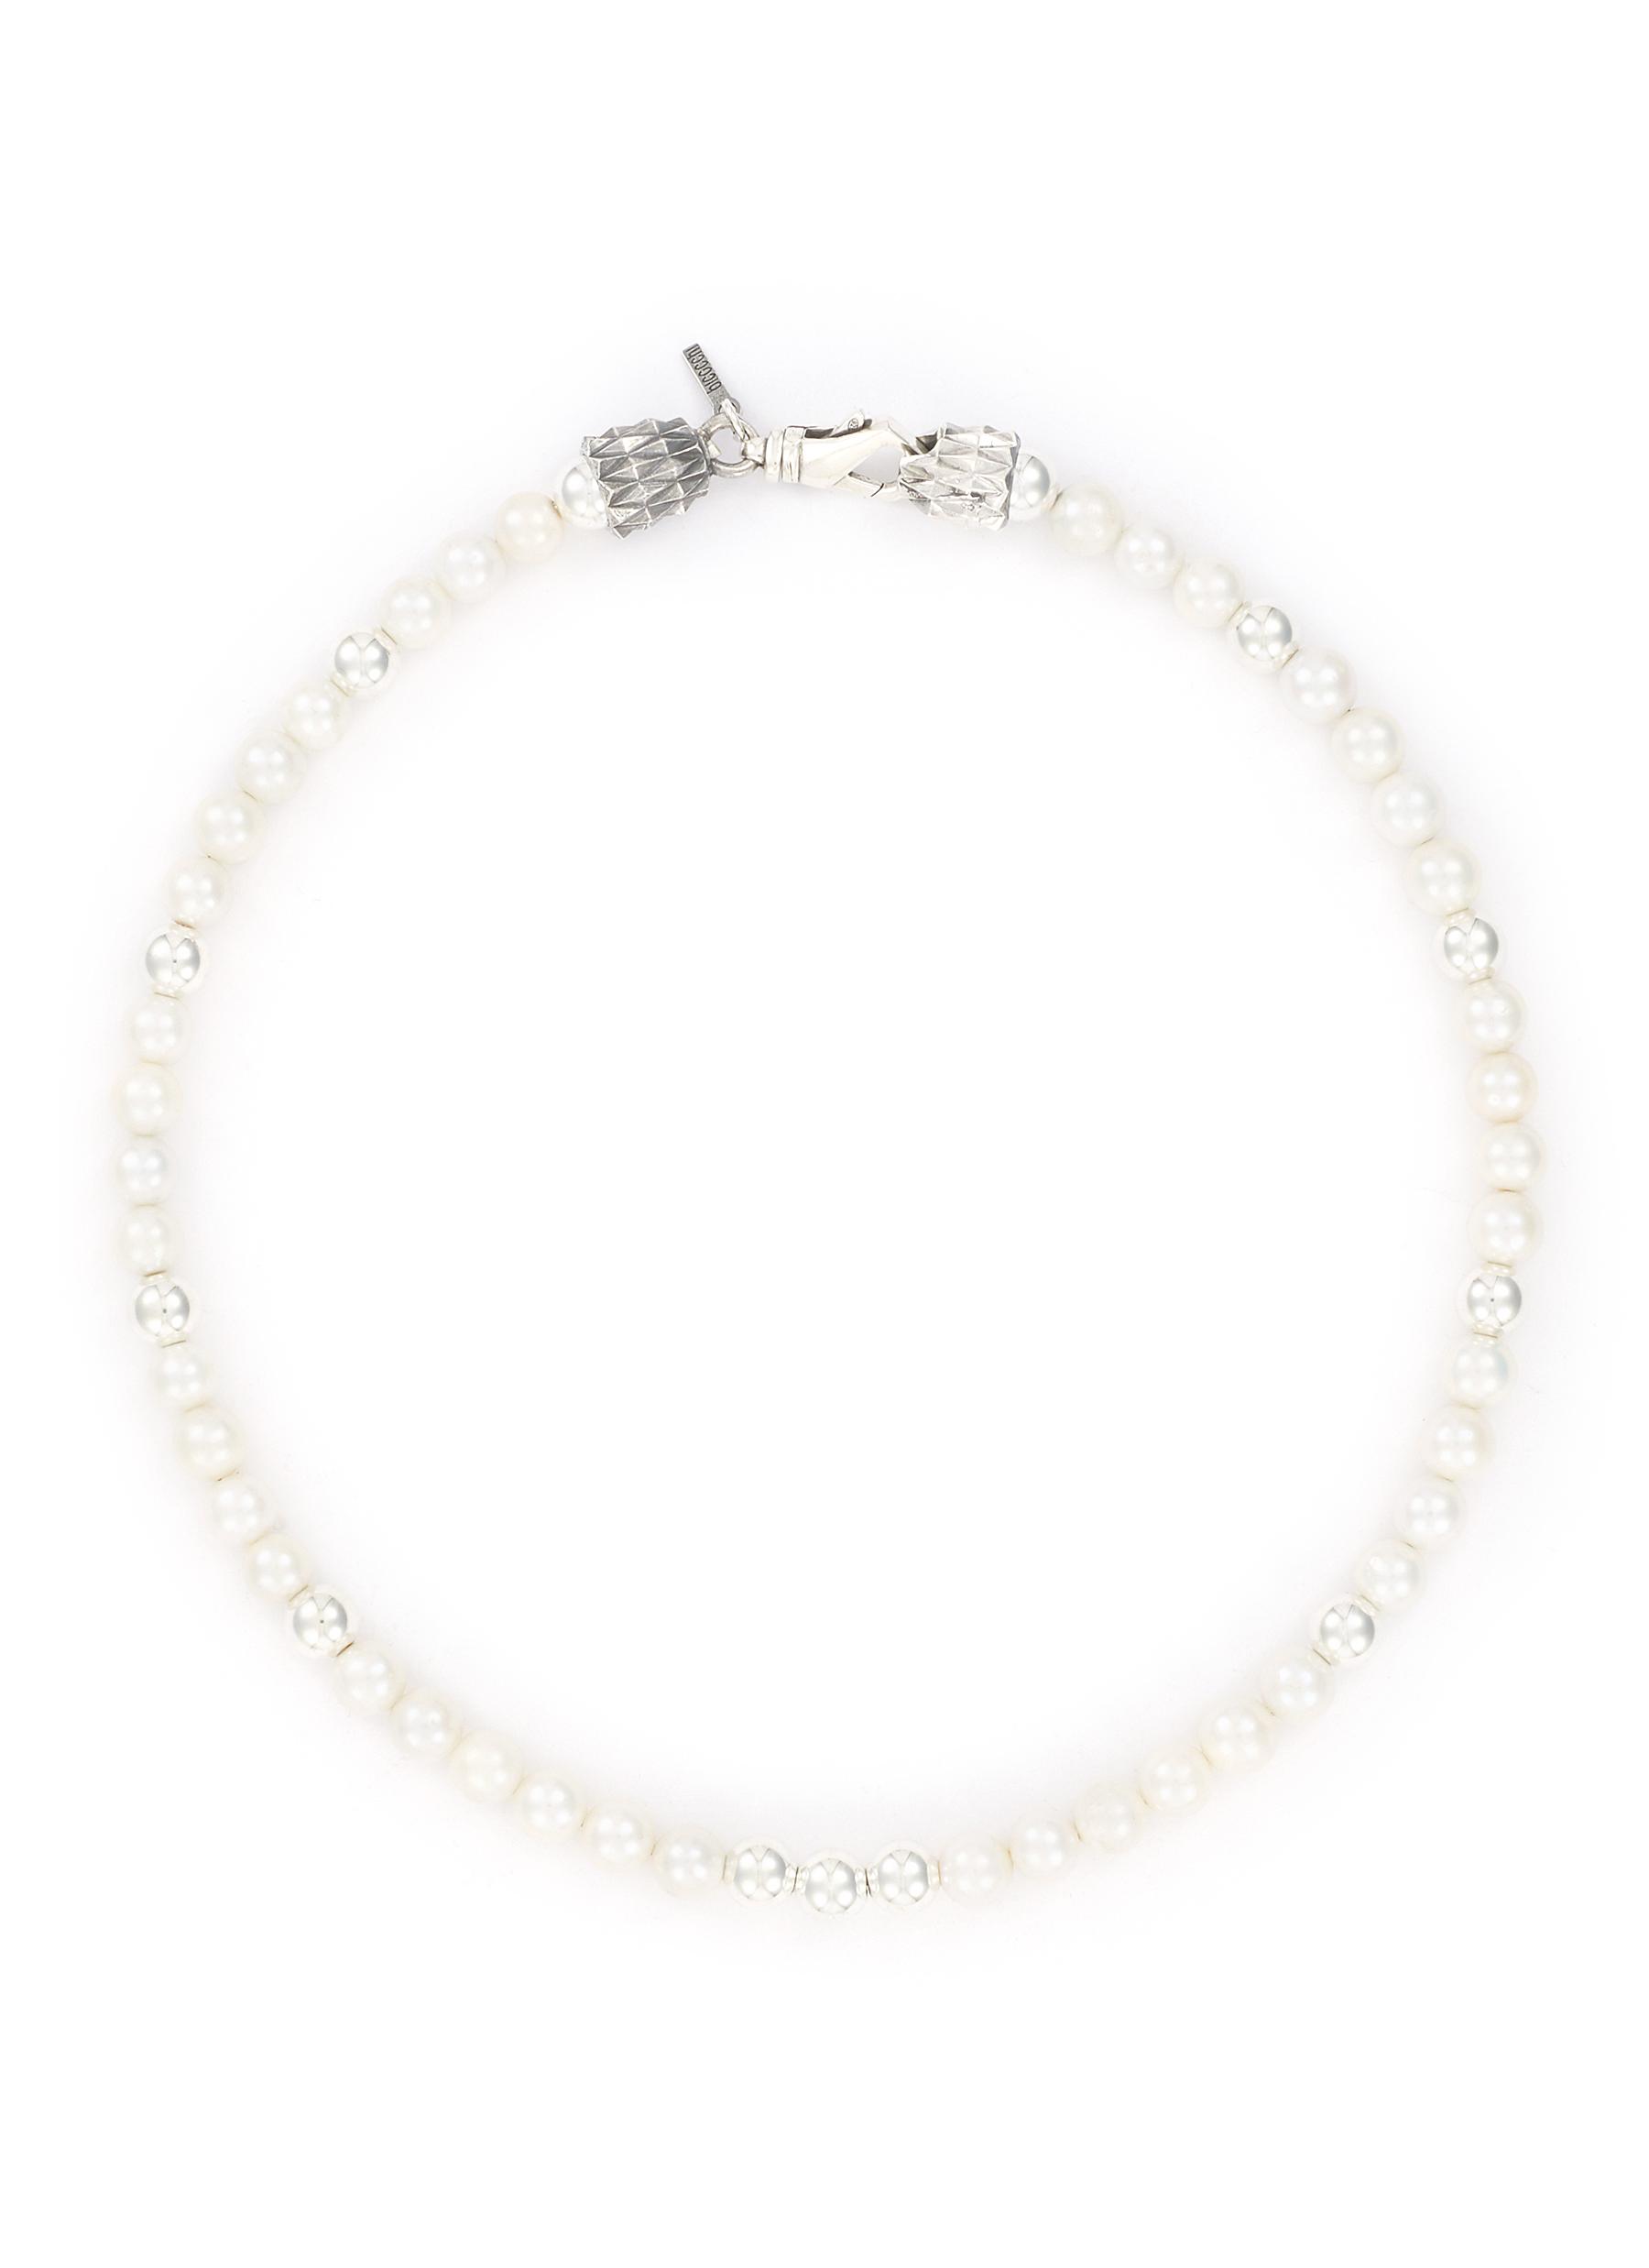 Casuals Fairhope 16 Pearl Necklace with Silver Magnetic Clasp - M & F  Casuals